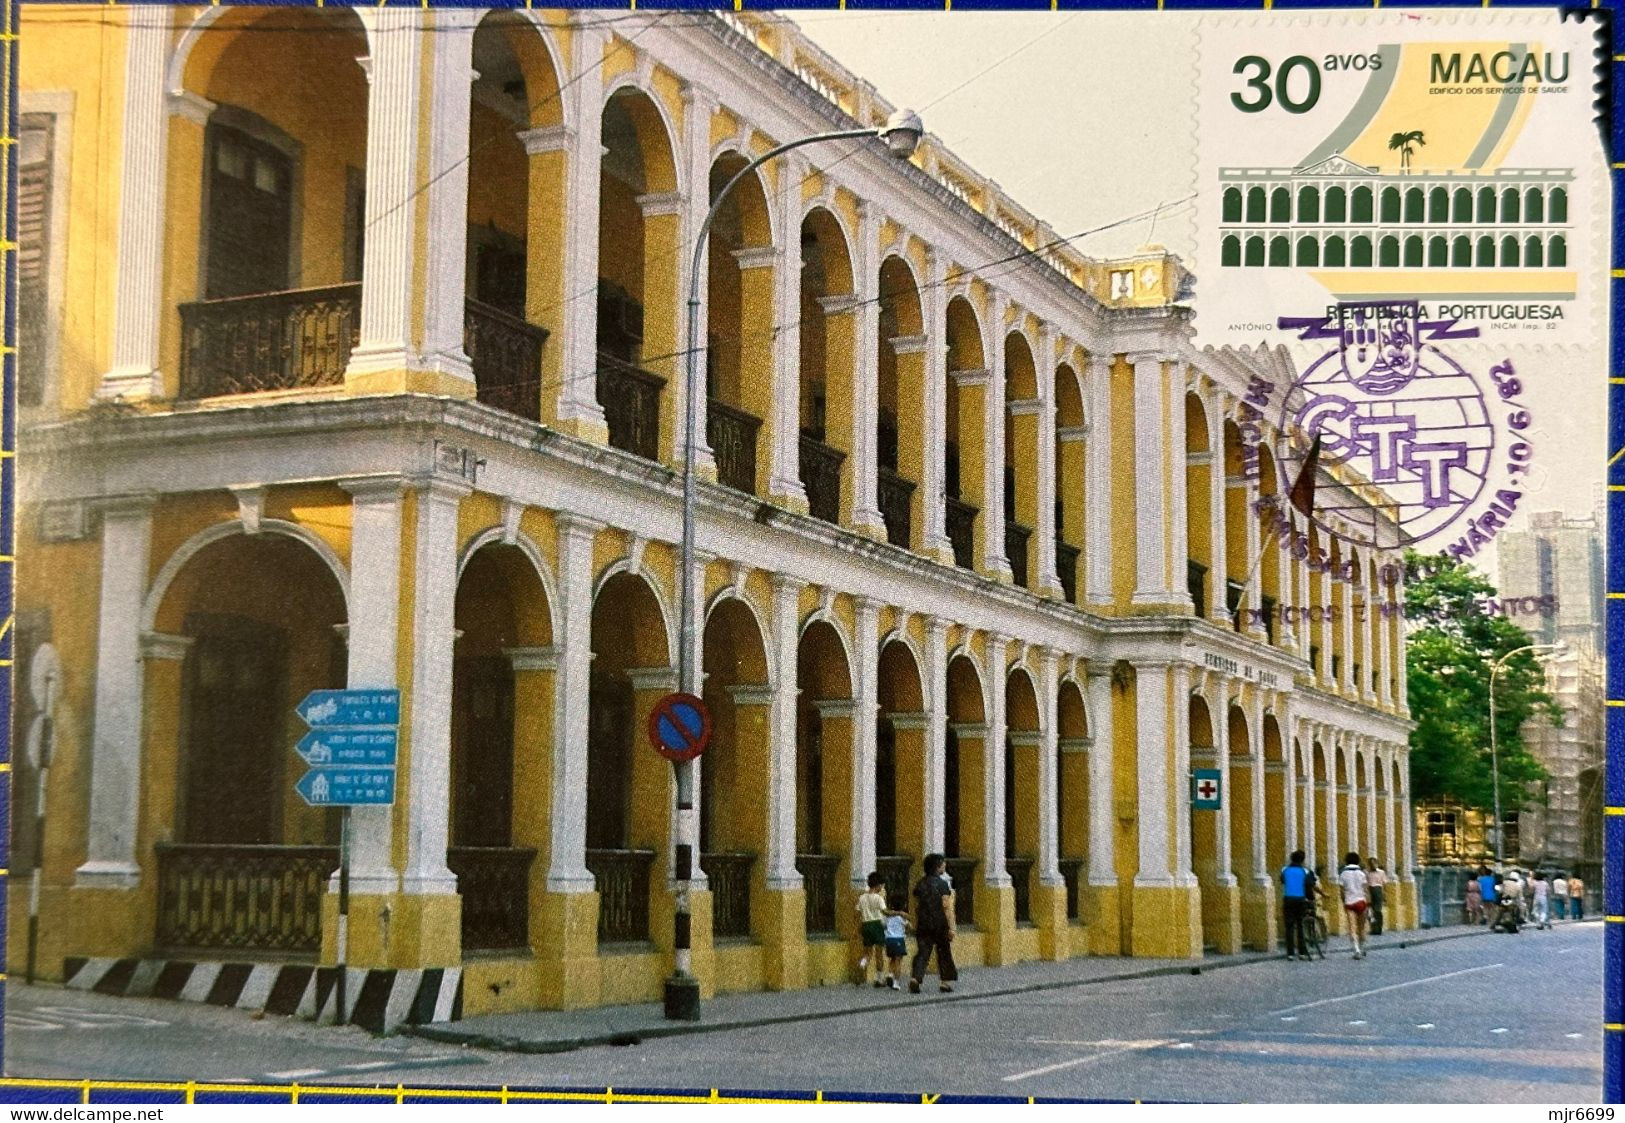 MACAU - 1982 BUILDINGS ISSUE SET OF 5 MAX CARD (CANCEL - FIRST DAY) - Tarjetas – Máxima